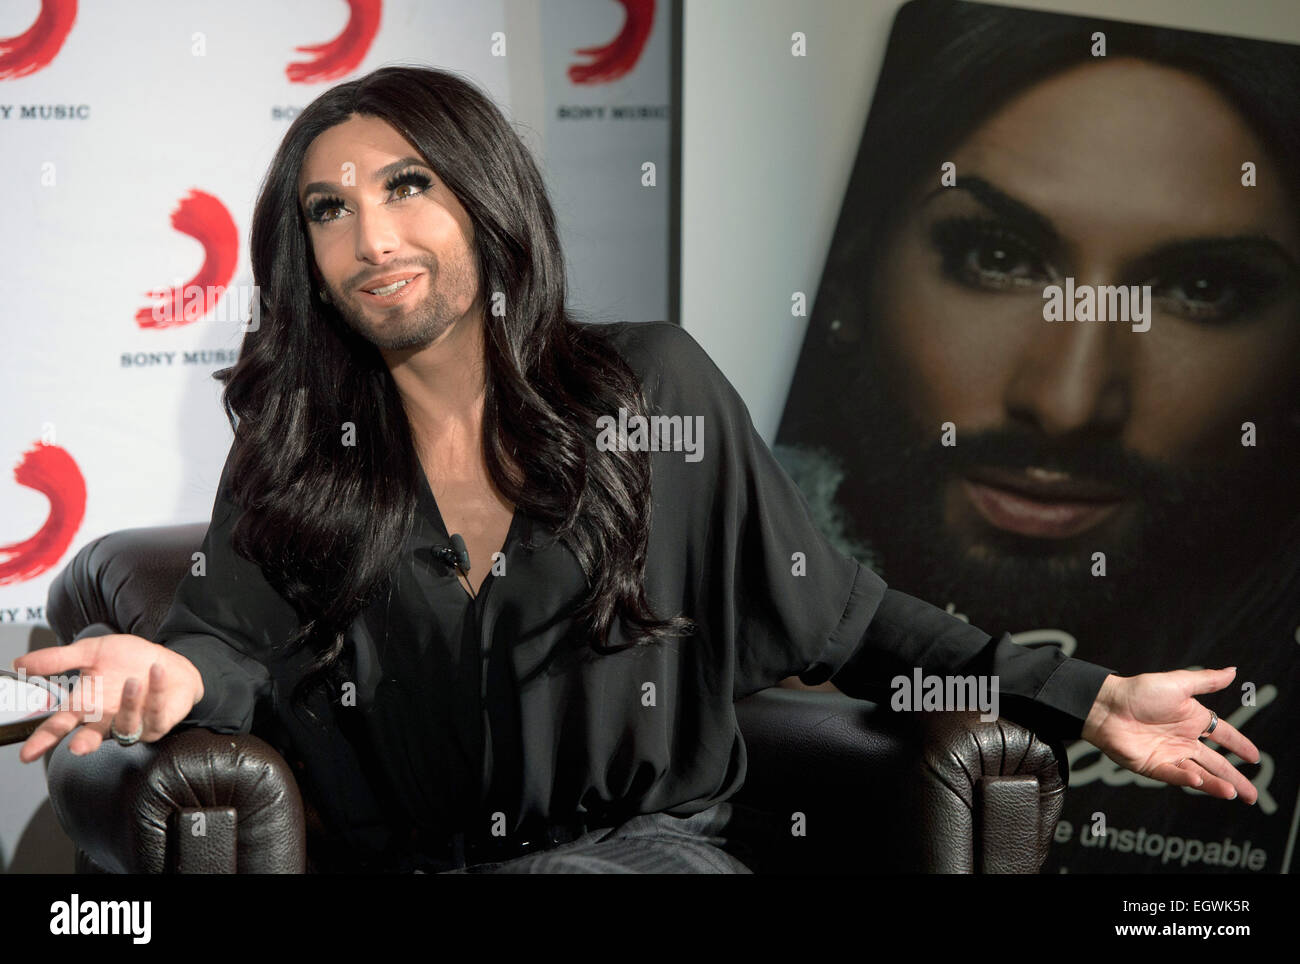 Berlin, Germany. 3rd Mar, 2015. Austrian singer and dragqueen Conchita Wurst  speaks during a press conference in Berlin, Germany, 3 March 2015. The  winner of the Eurovision Song Contest presented her new